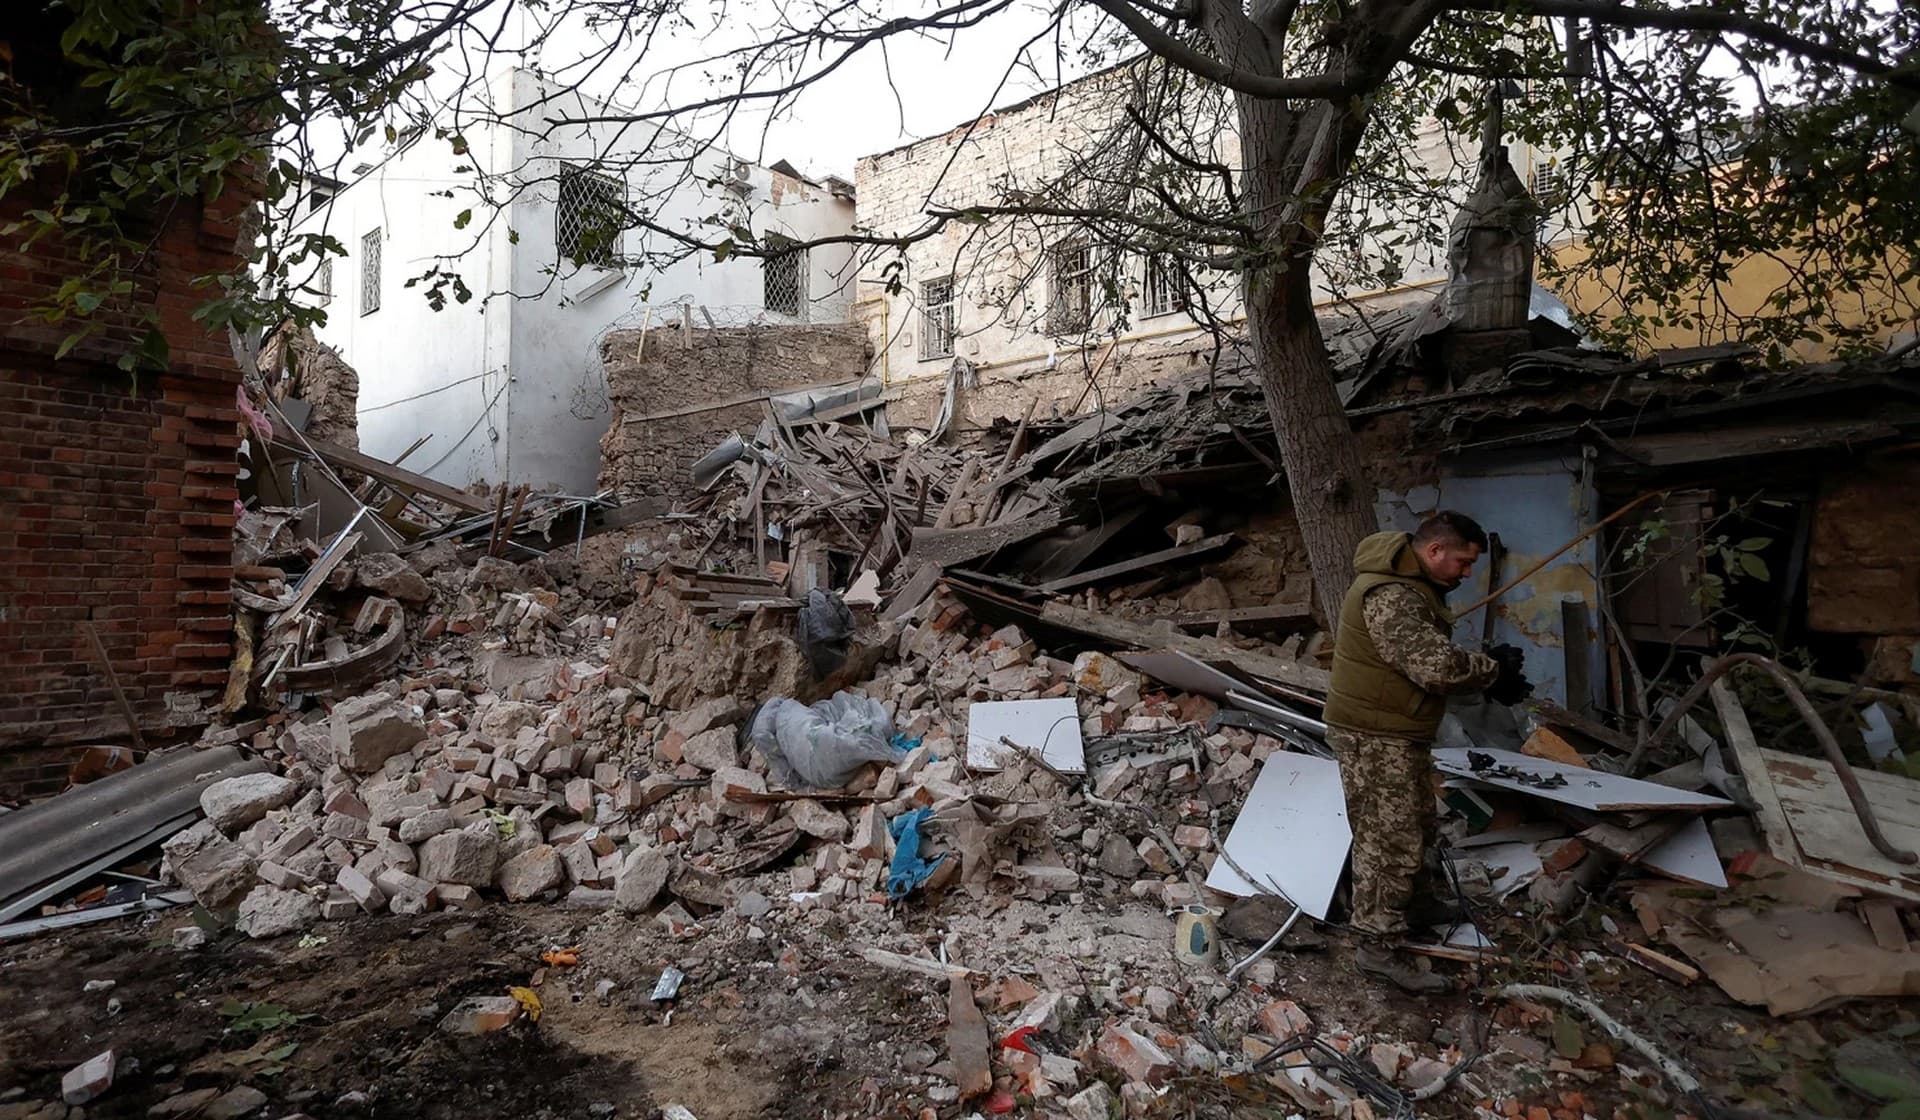 A Ukrainian serviceman collects remains of a missile at the site of a residential building heavily damaged during a Russian attack in Mykolaiv